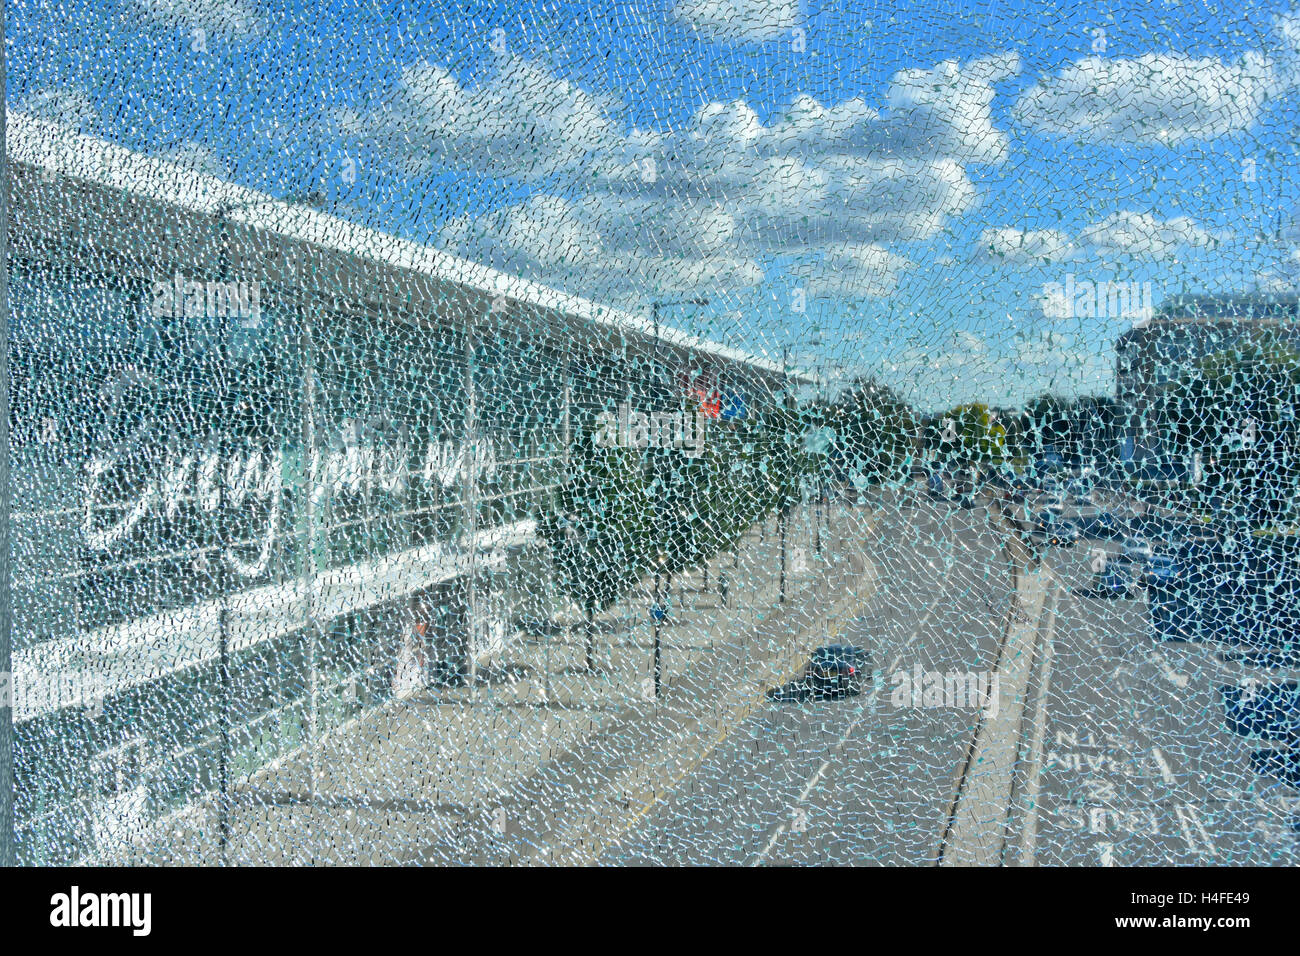 Shattered concept vision of a main road & Tesco Store in Slough Berkshire UK as seen through a crazed broken glass window pane on a blue sky sunny day Stock Photo